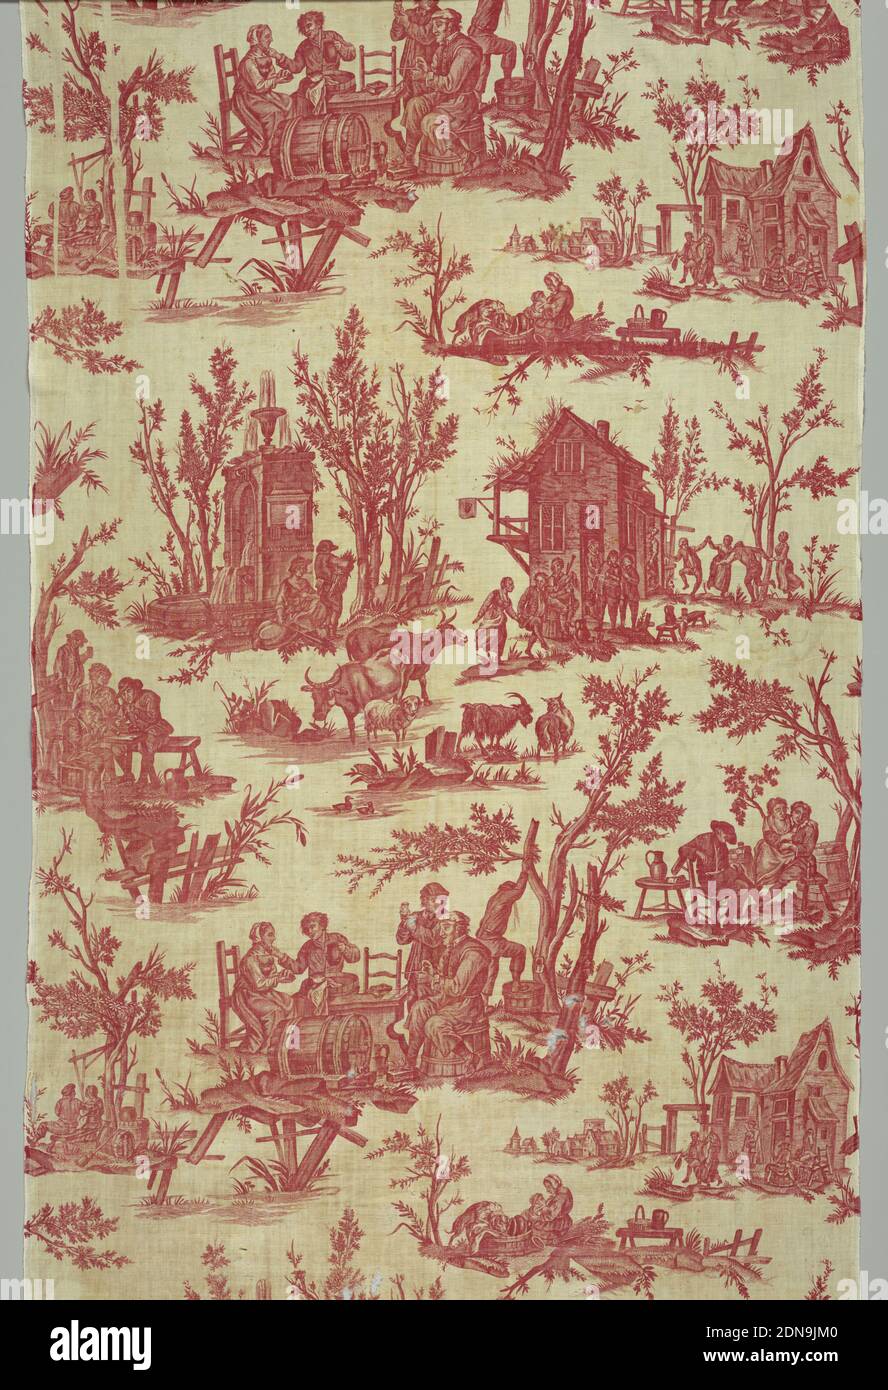 La Fête Flamand, Jean-Baptiste Huët, (French, 1745–1811), Oberkampf & Cie., (Jouy-en-Josas, France, 1759–1815), Medium: plain weave cotton Technique:printed by engraved plate, Scenes of people enjoying food and drink in a rural landscape. Red on white., Jouy-en-Josas, France, ca. 1797, printed, dyed & painted textiles, Textile with chef de piece, Textile with chef de piece Stock Photo